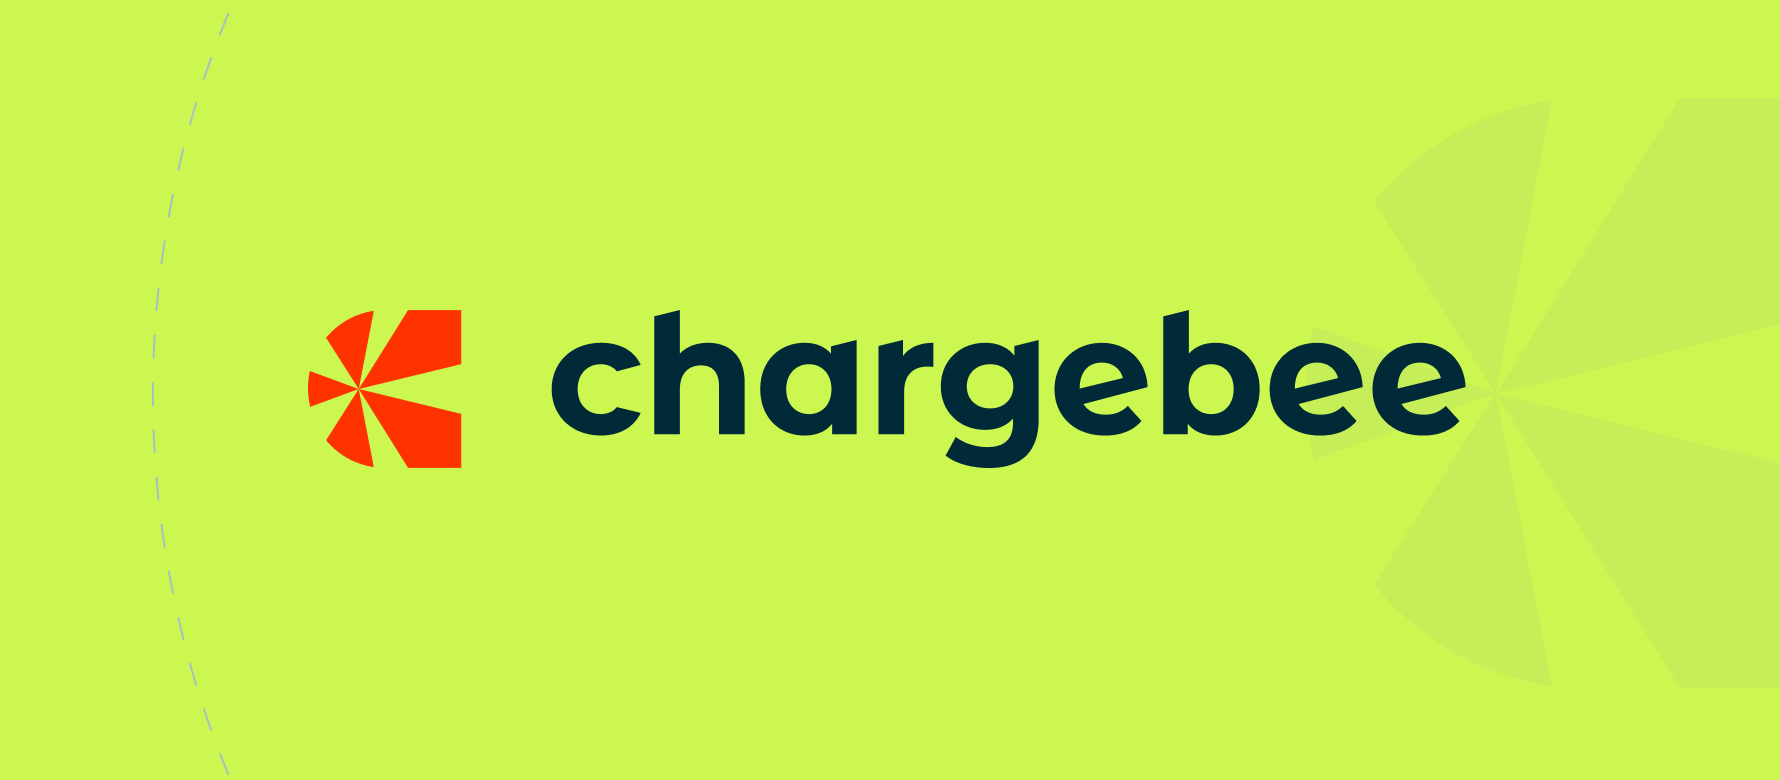 Case Study | Dashboard screen design of Chargebee US-based recurring billing and subscription management FinTech tool